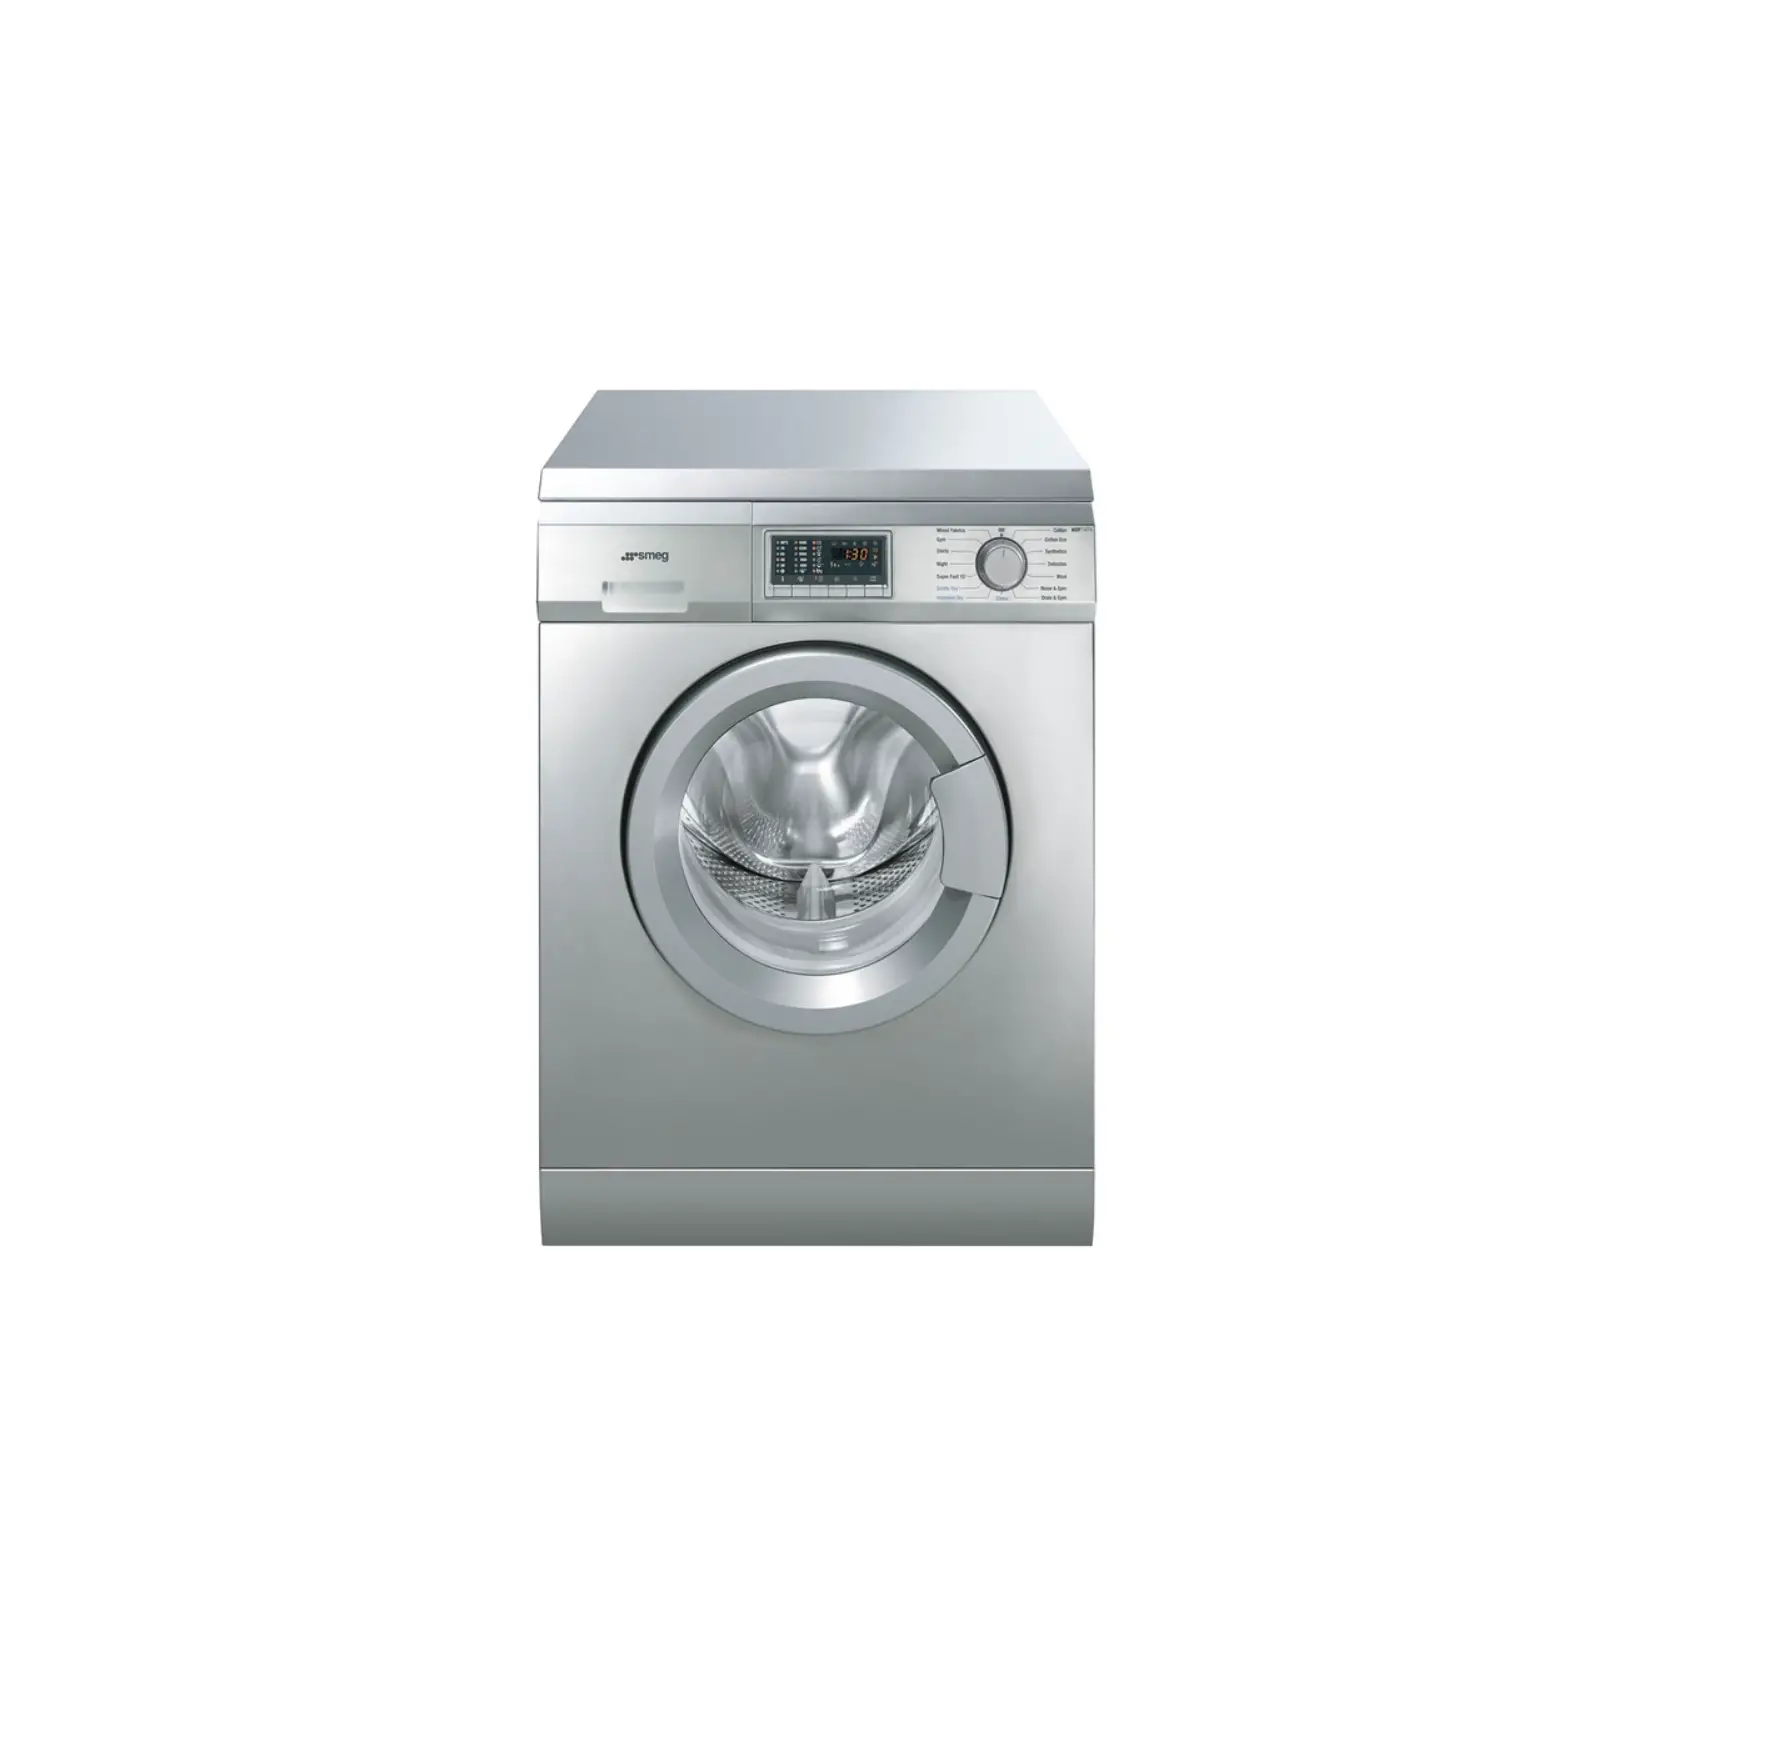 F147X-2 Washer Dryer Stainless Steel